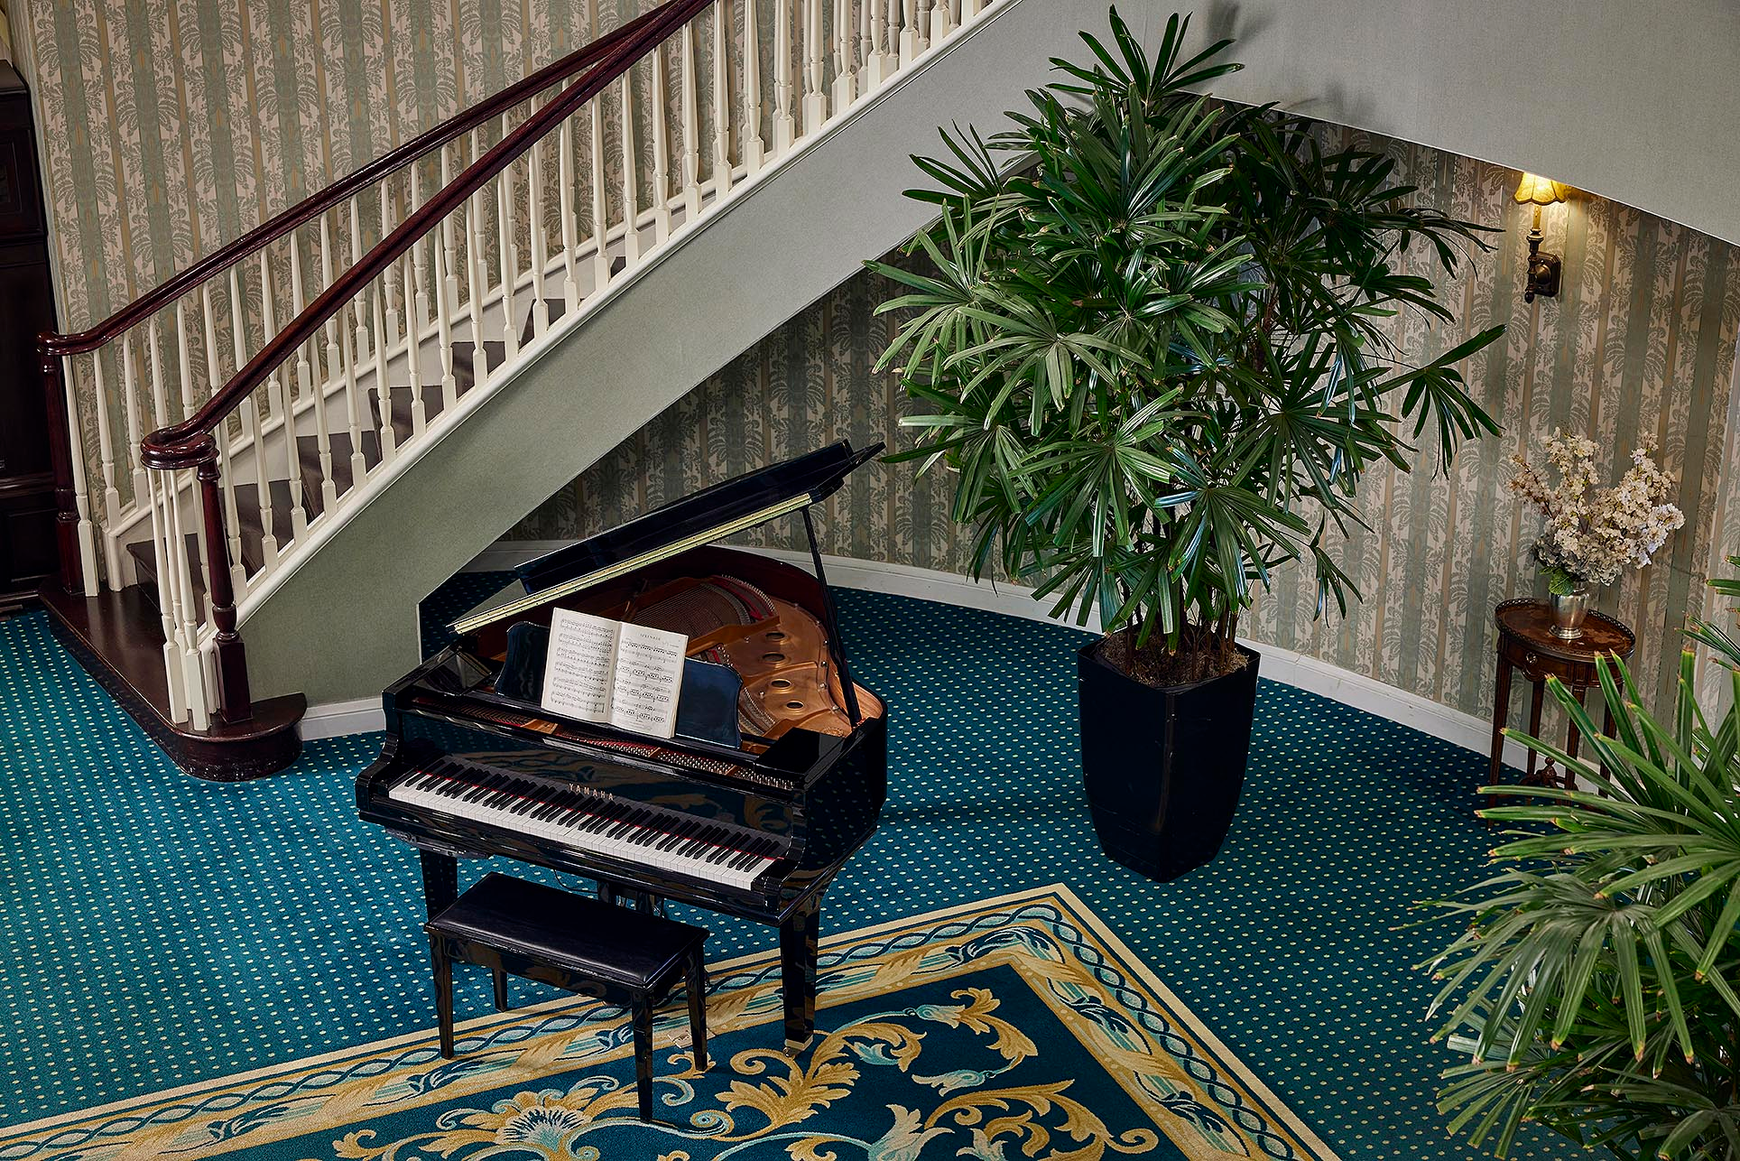 A stately baby grand in the stately lobby